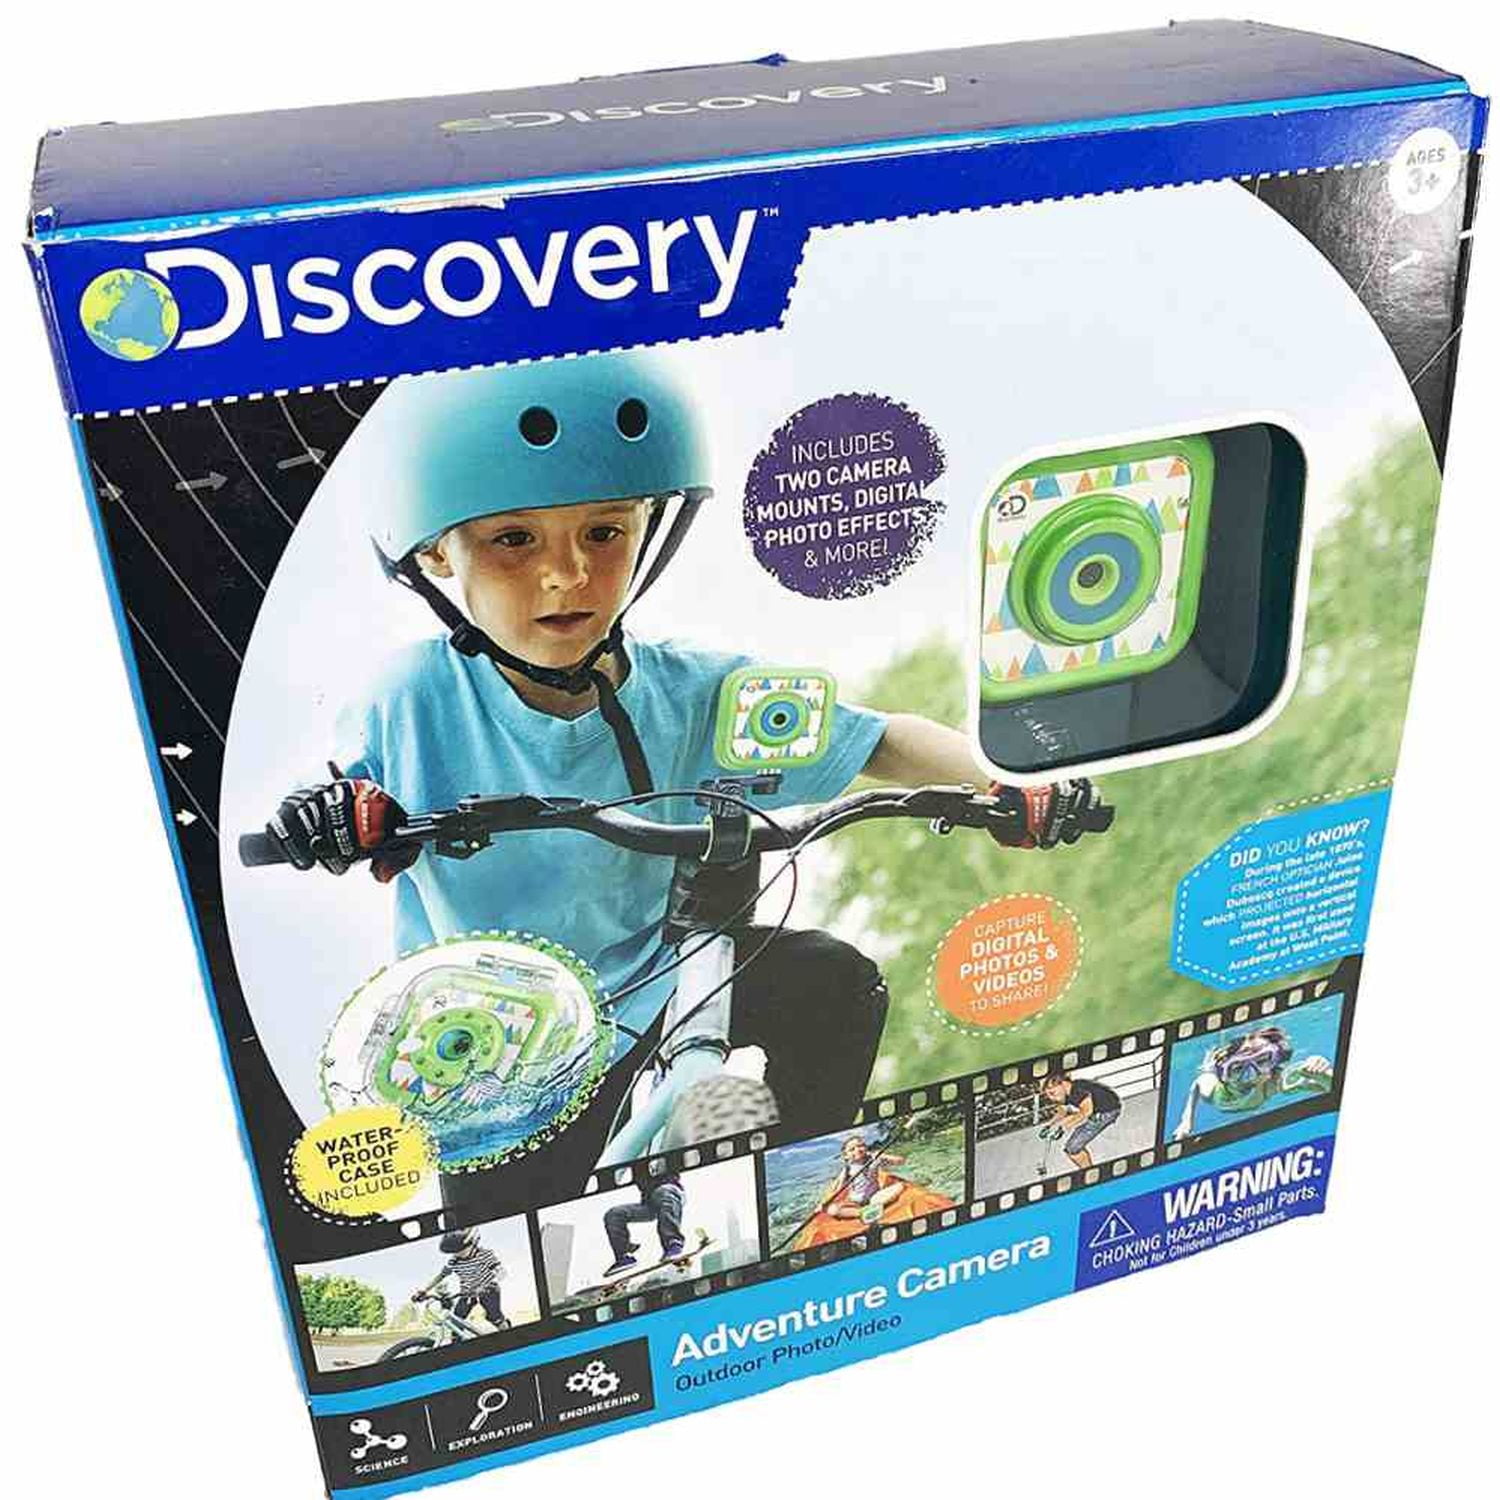 Discovery Kids Outdoor Adventure Camera BRAND for sale online 